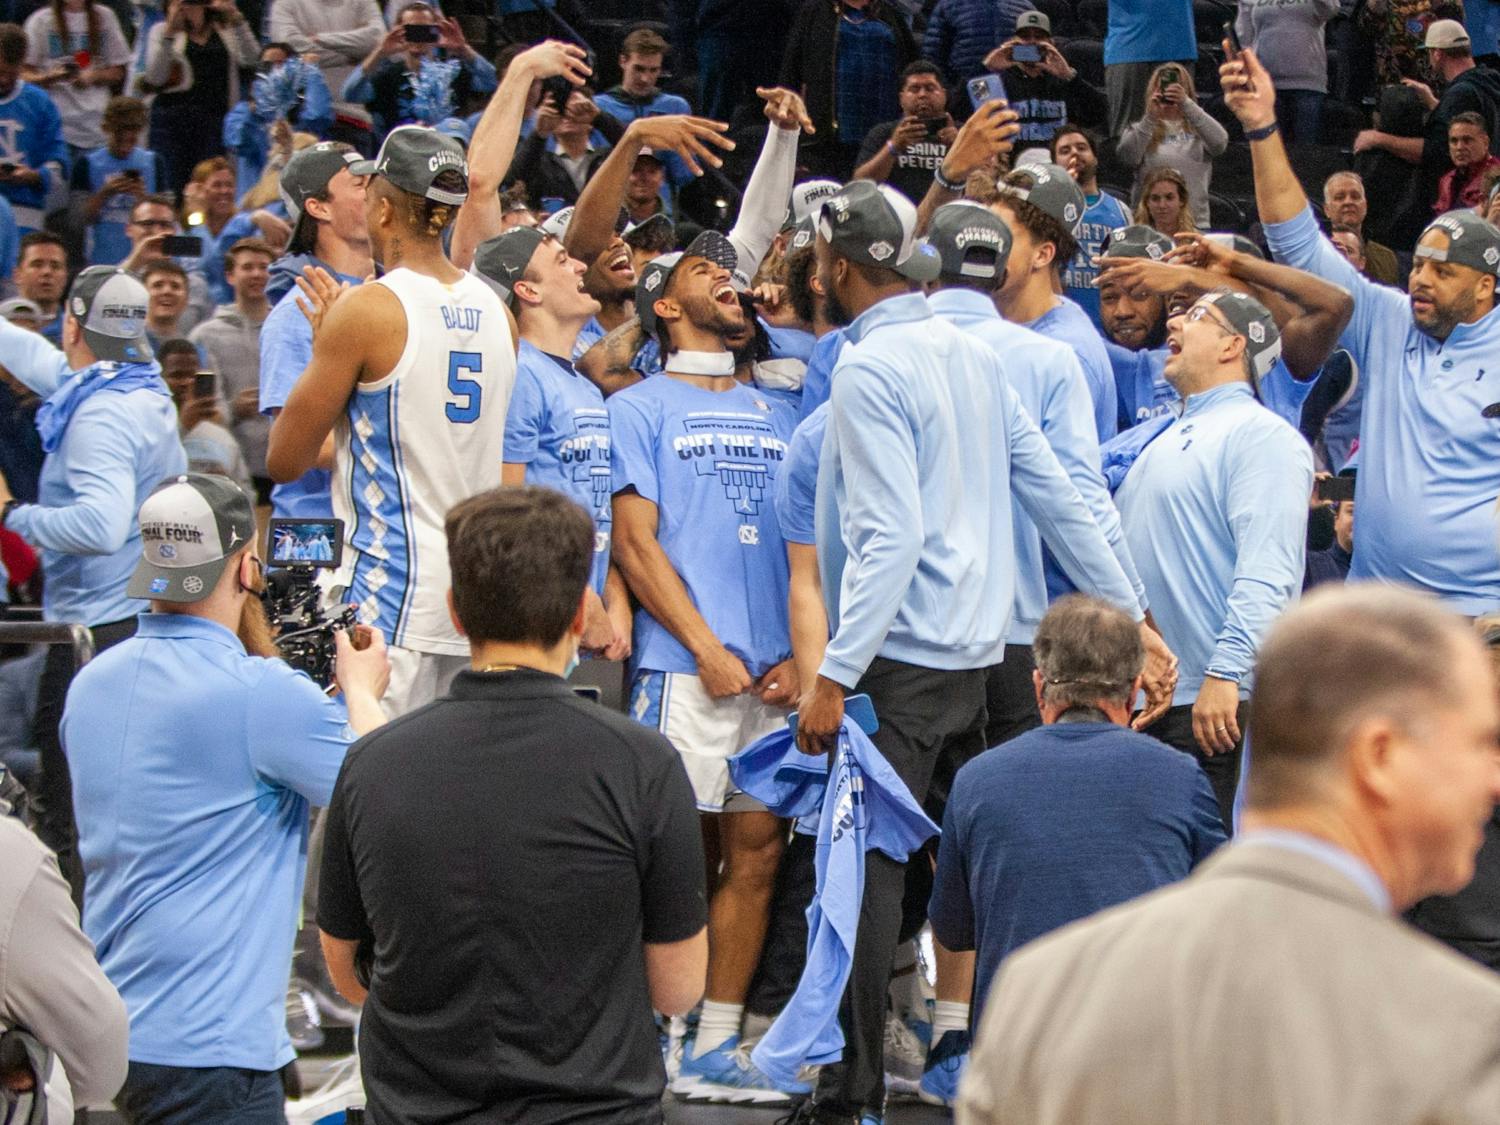 The UNC Men's Basketball Team celebrates after beating St. Peter's in the Elite 8 game of the NCAA tournament &nbsp;at the Wells Fargo Center in Philadelphia. UNC won 69-49 and advanced to the Final Four. &nbsp;